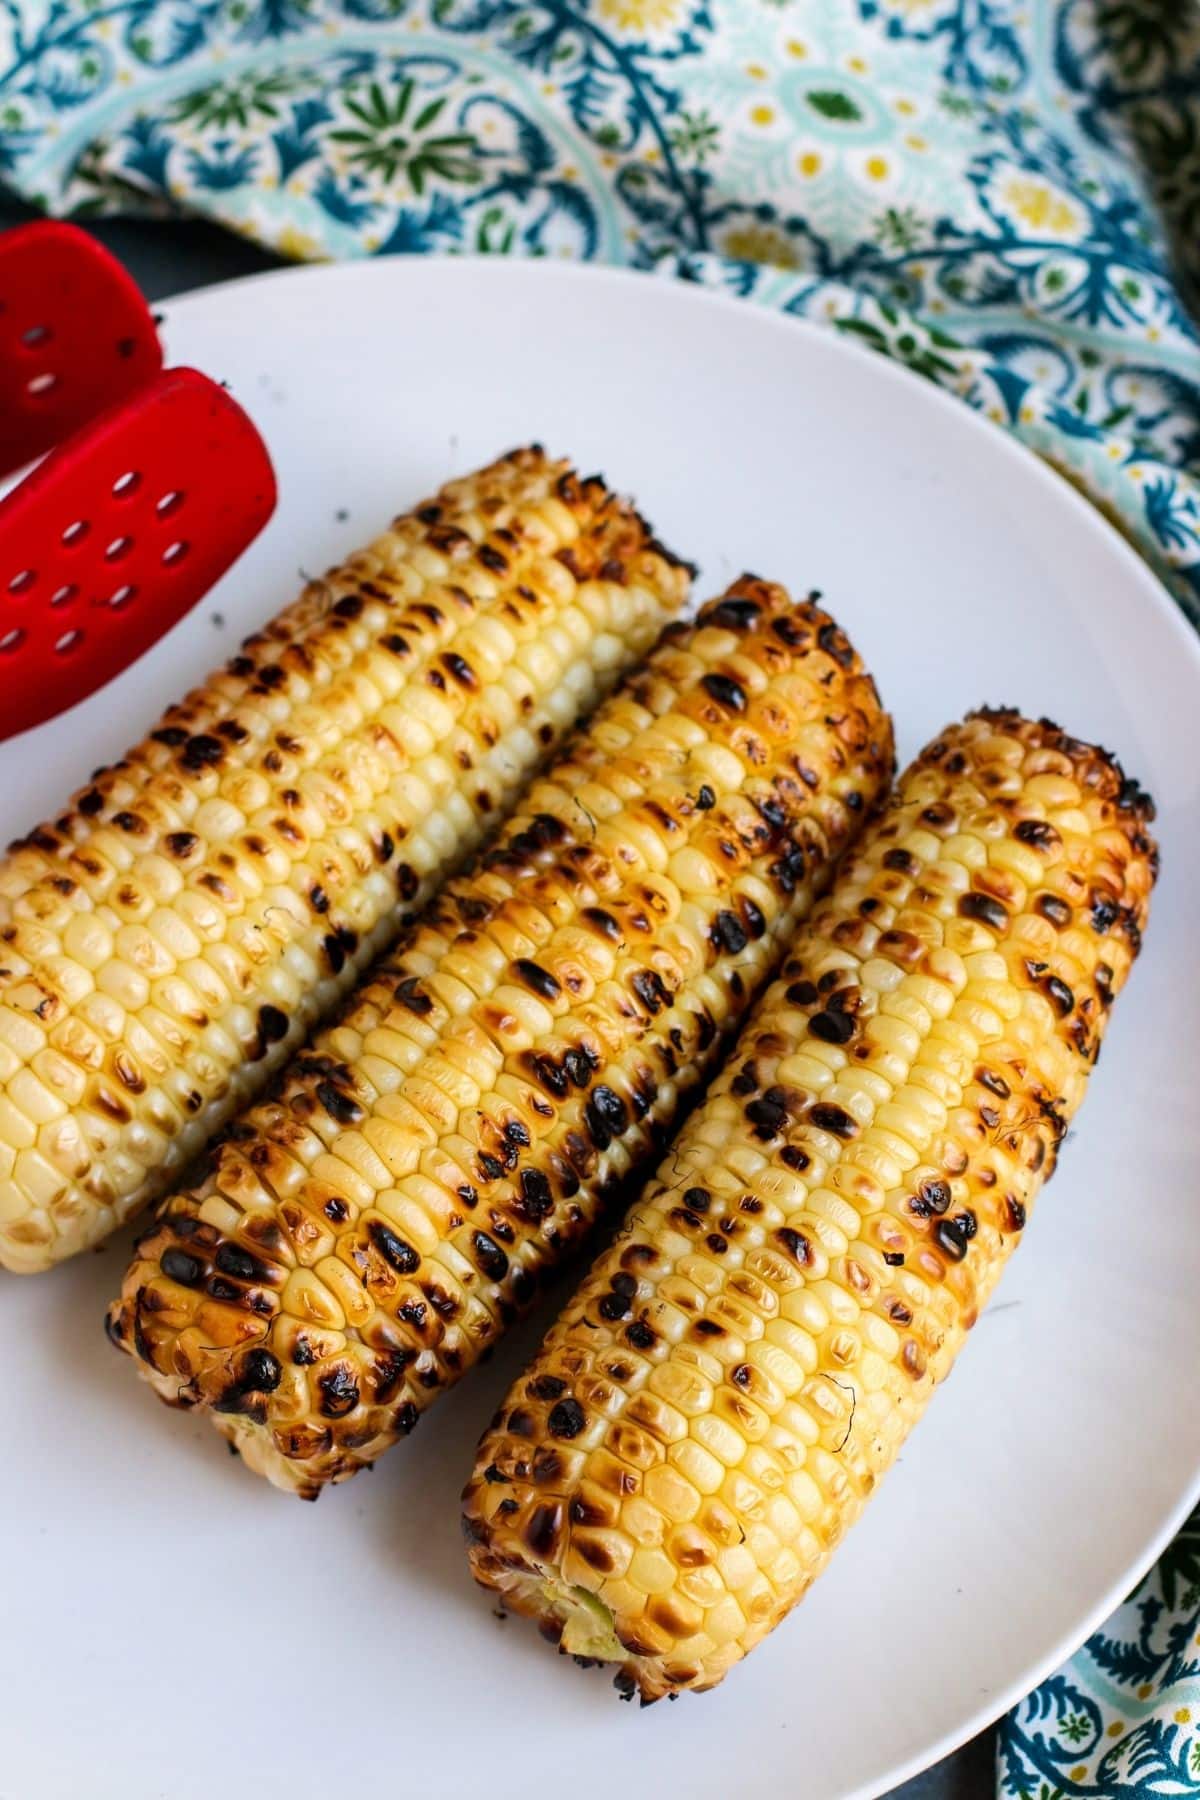 3 ears of grilled corn on a white plate